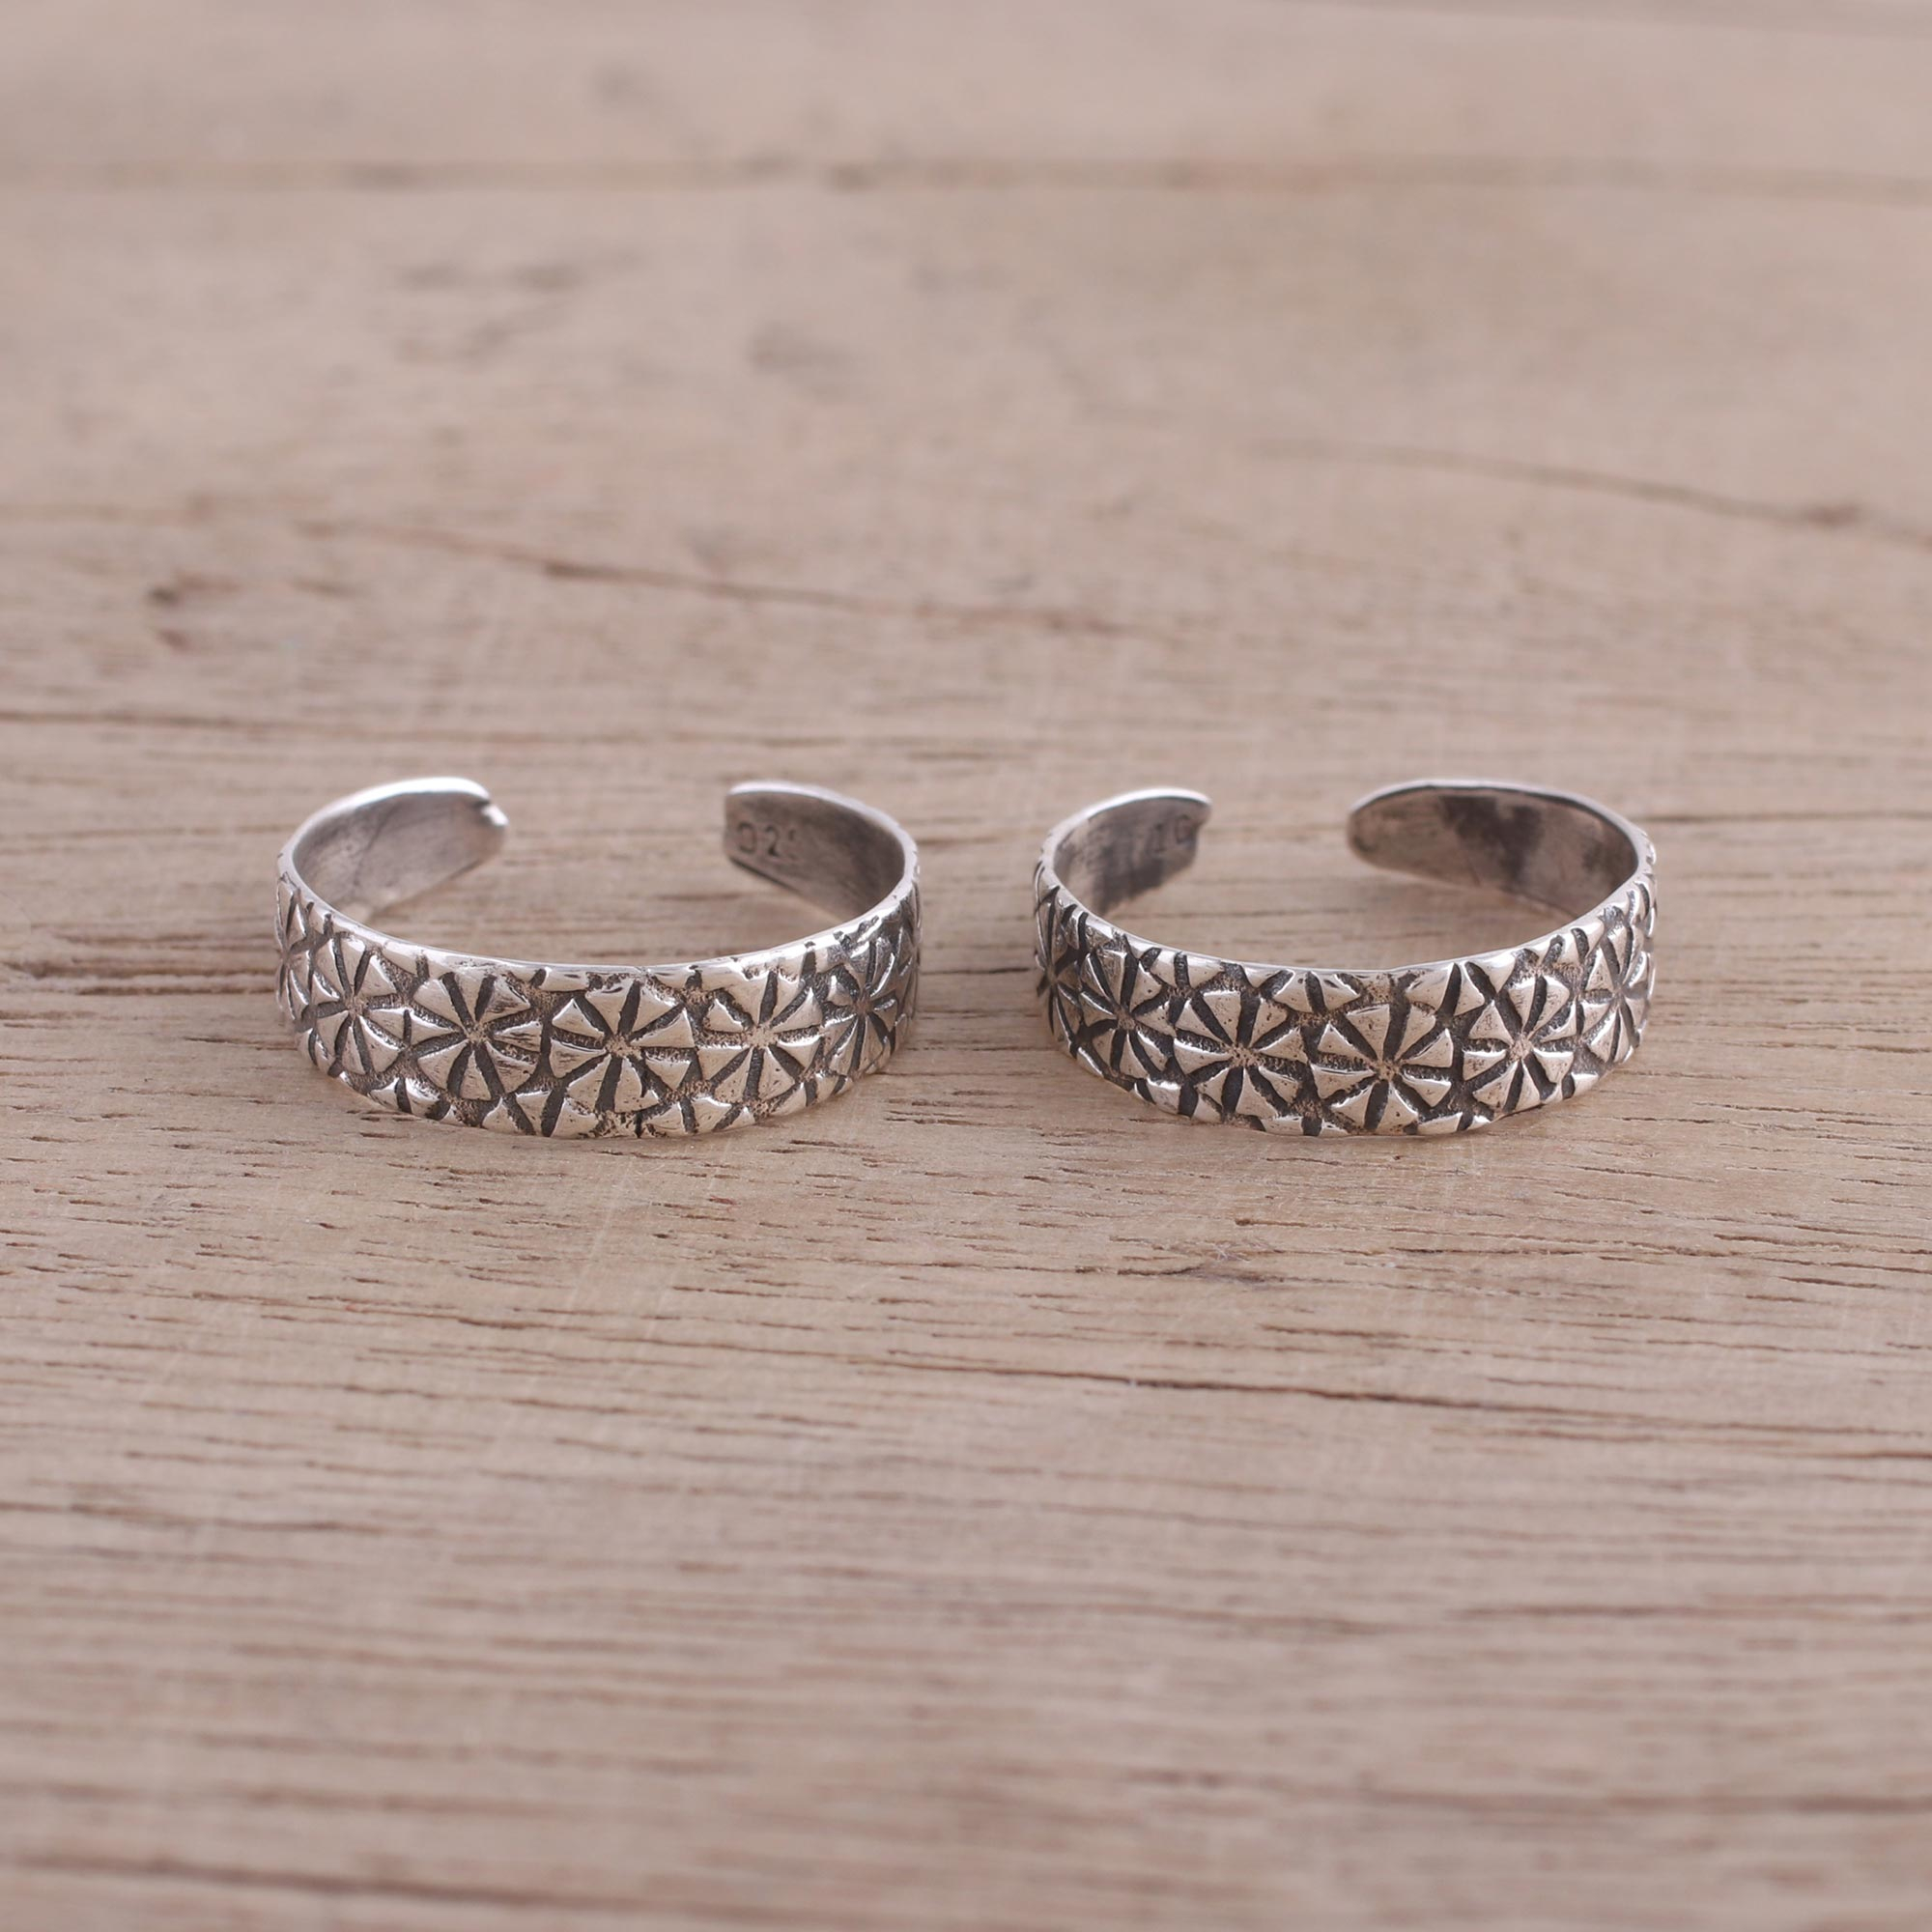 Tippy Toes — Jasmine | Sterling Silver Toe Ring